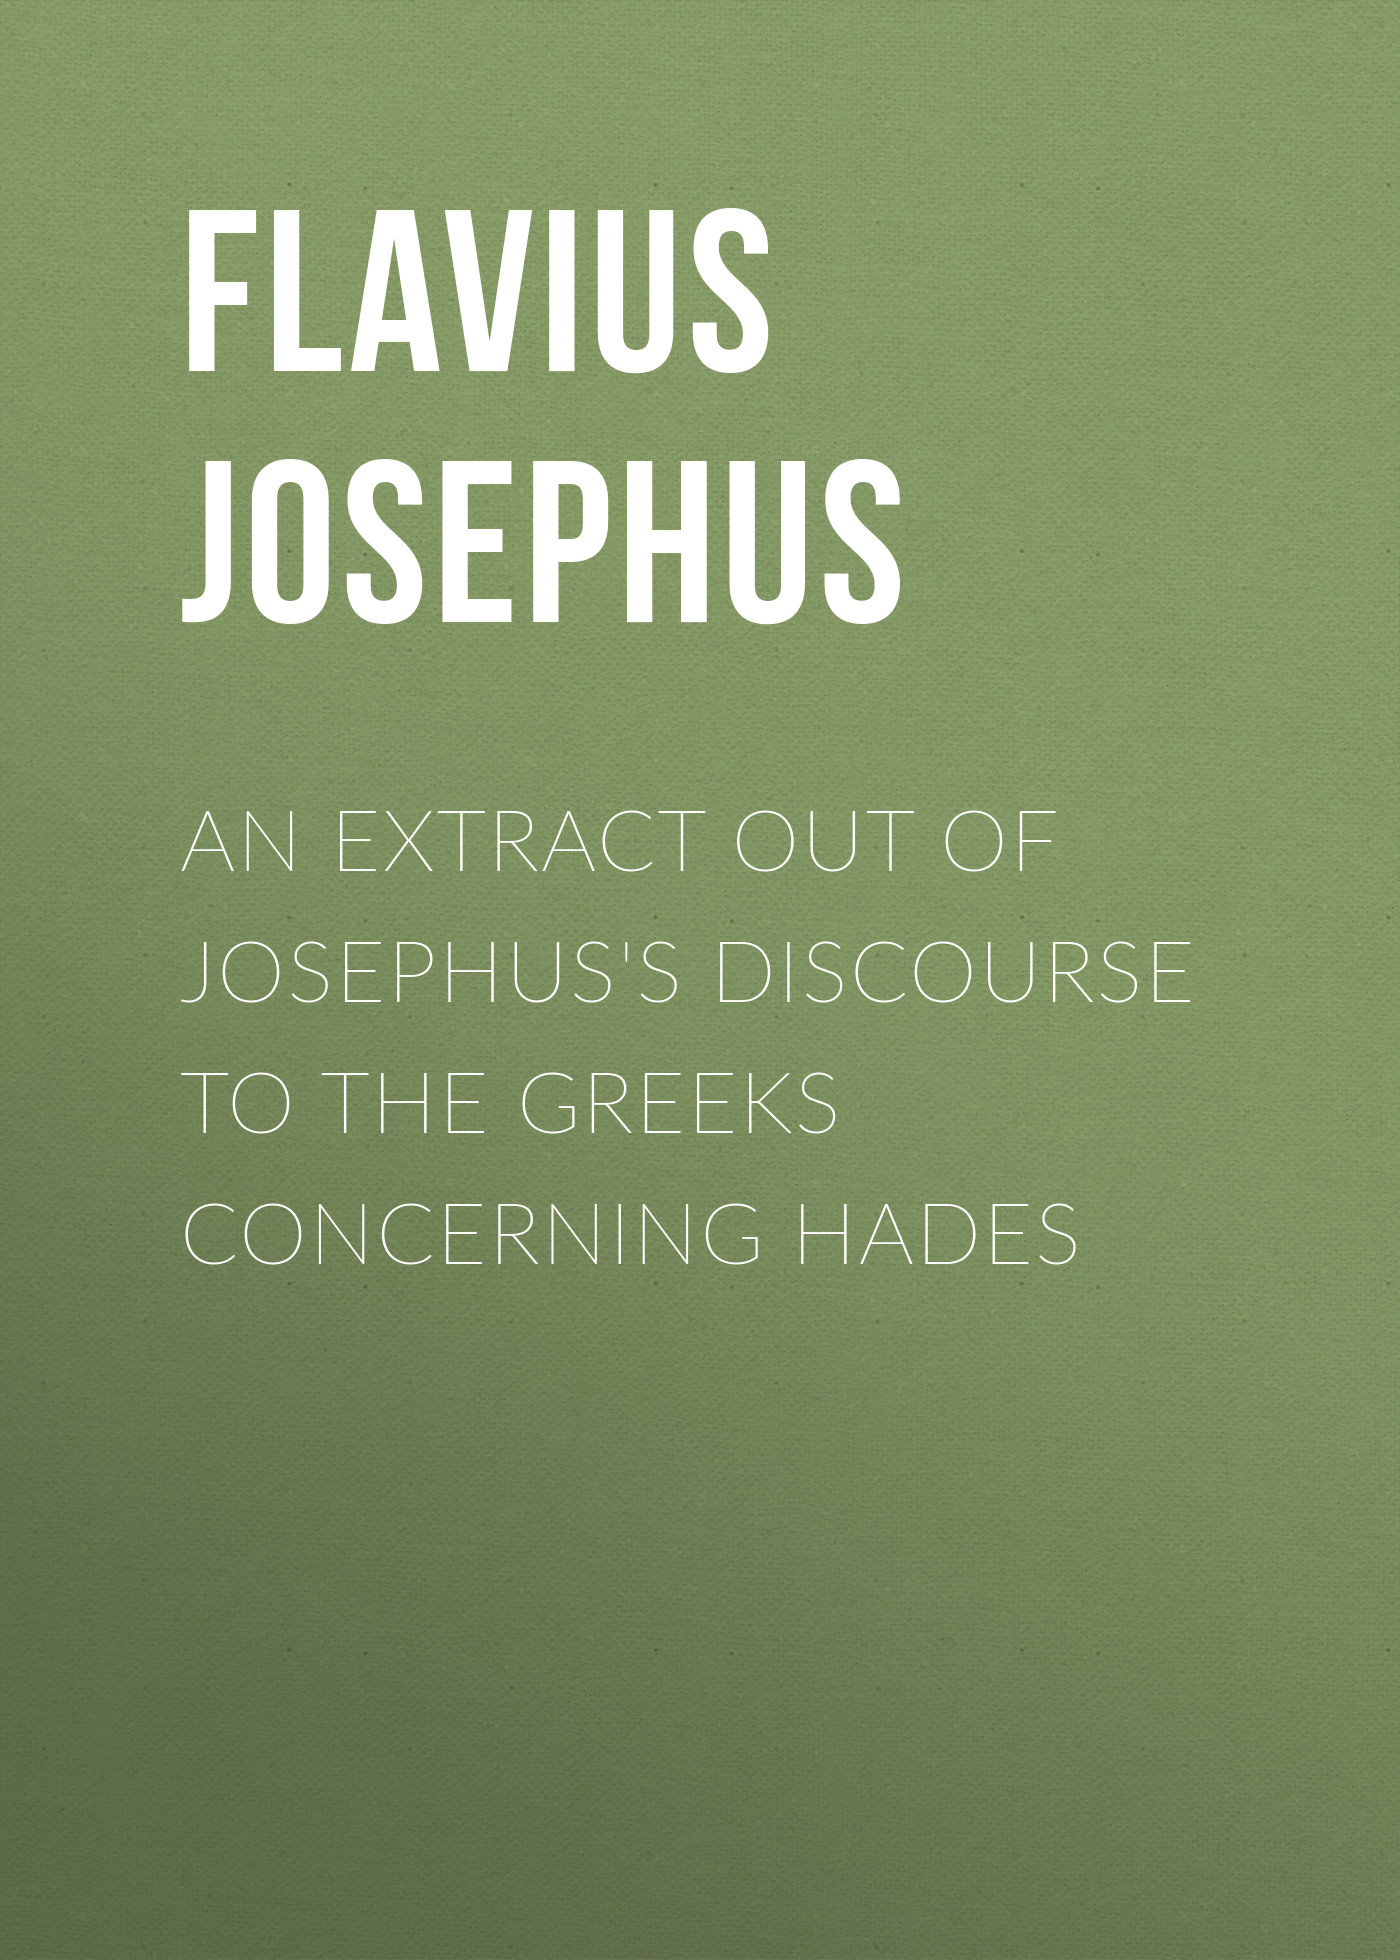 An Extract out of Josephus's Discourse to The Greeks Concerning Hades